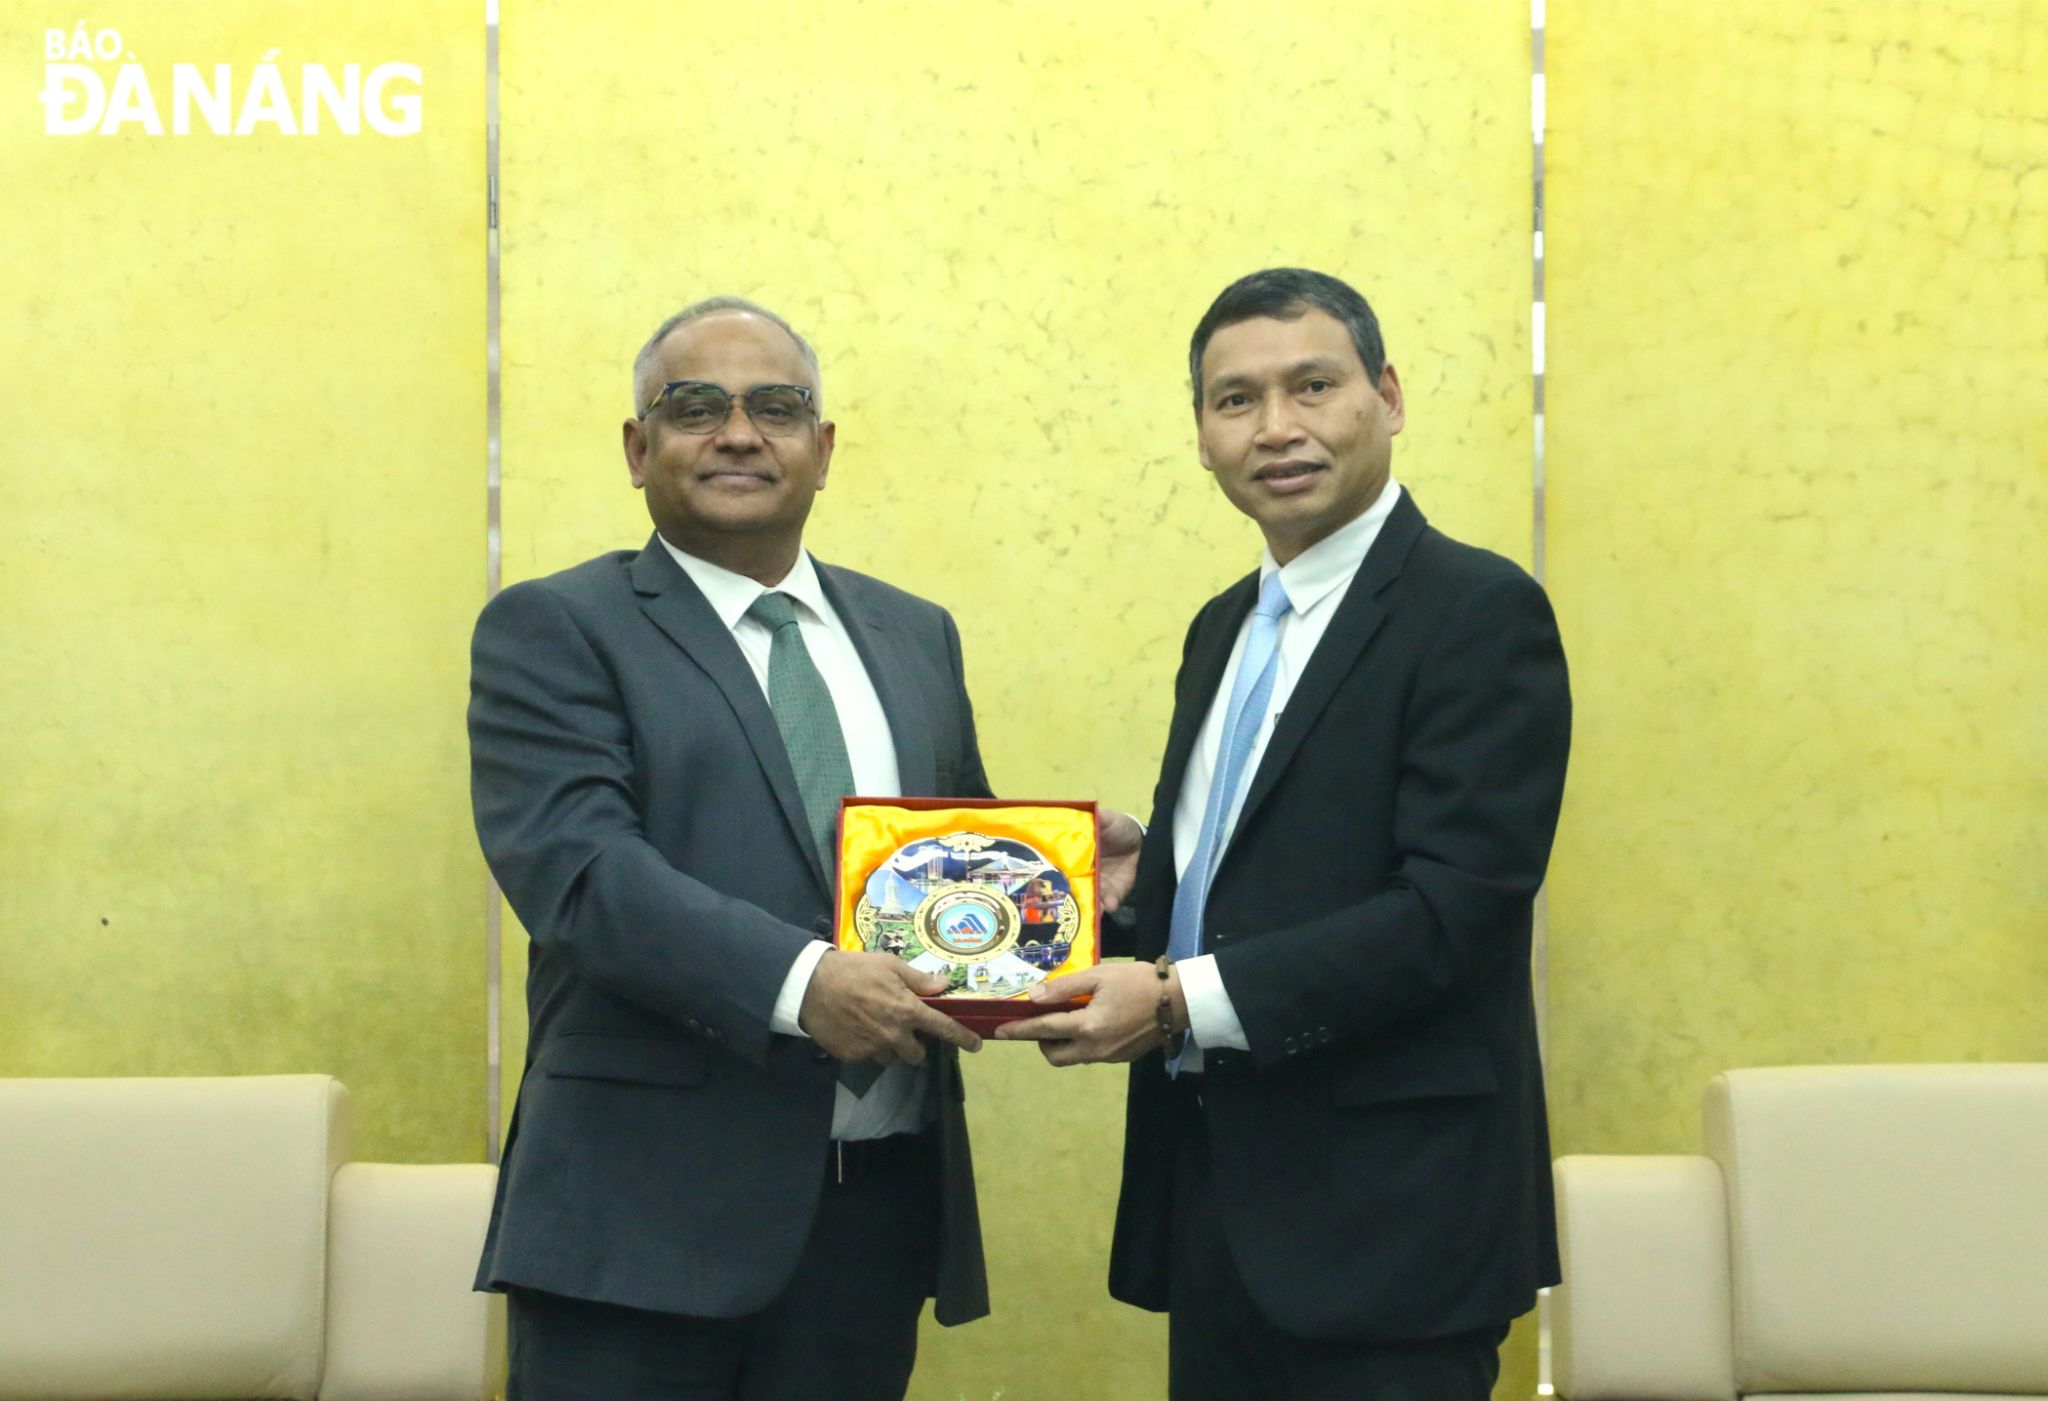 Da Nang People’s Committee Vice Chairman Ho Ky Minh hosting a reception for Country Director of the ADB for Viet Nam Shantanu Chakraborty on Tuesday.